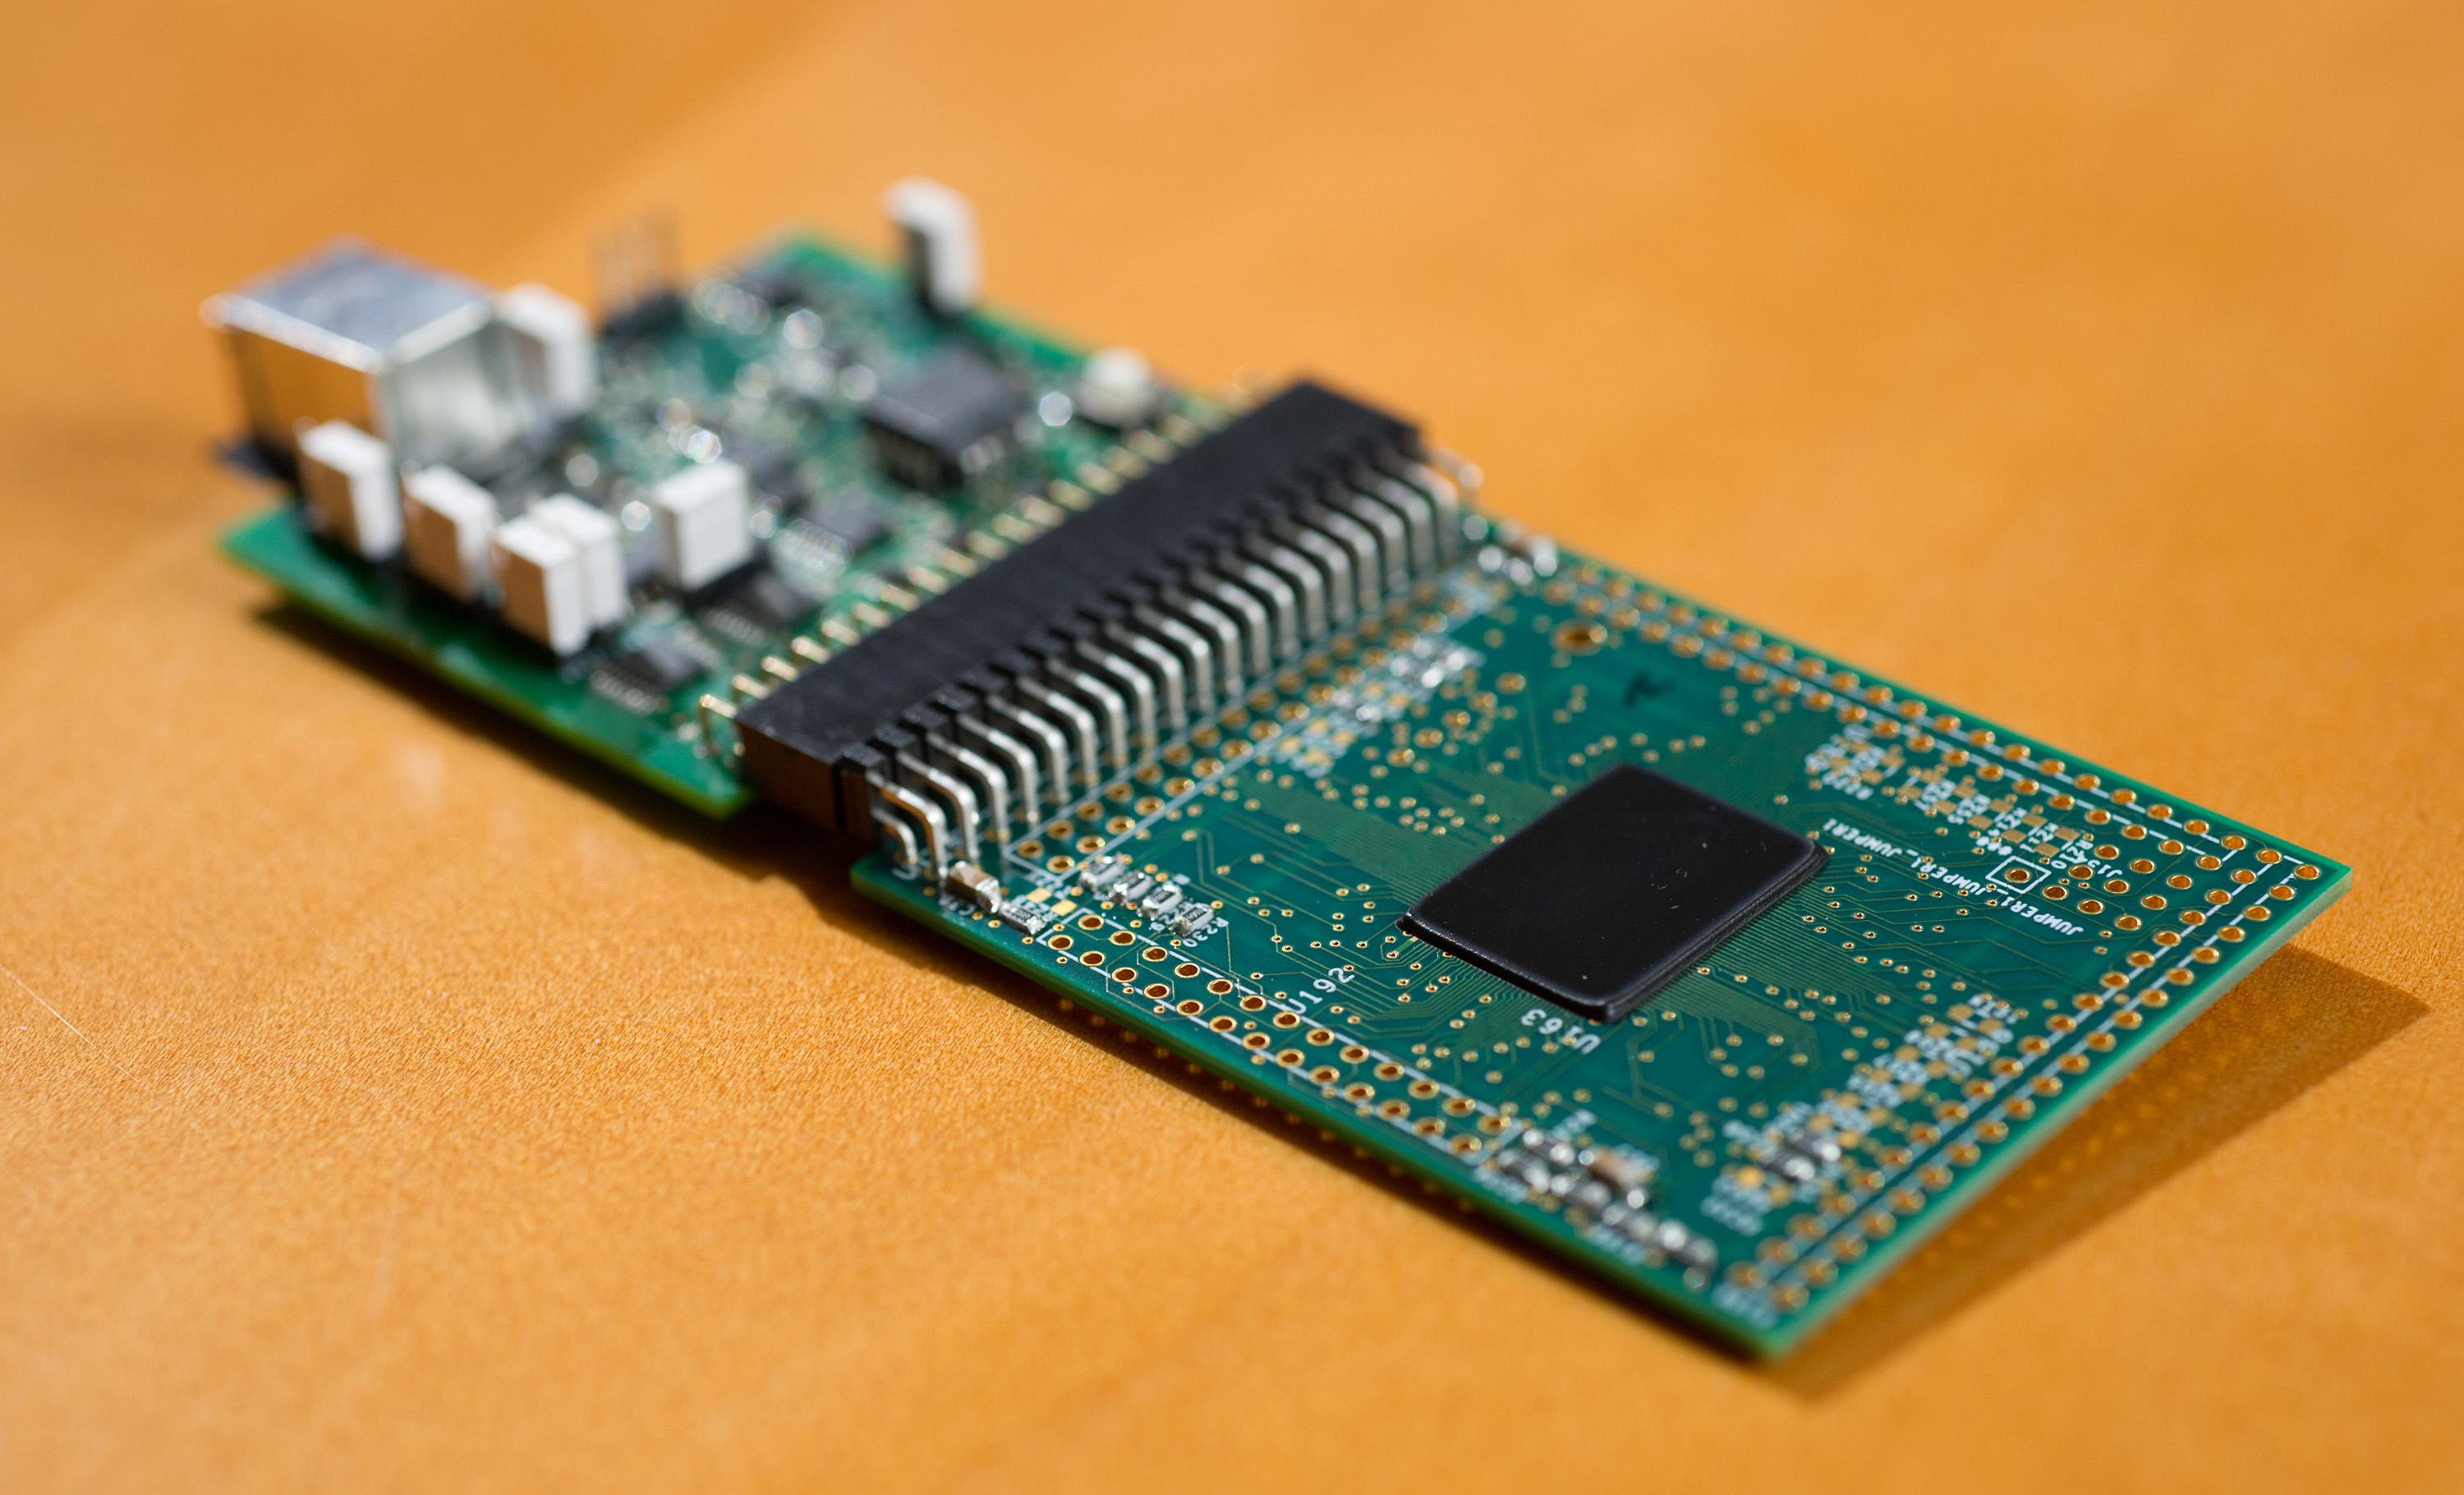 Close-up of a field programmable analog array (FPAA) board, developed by professor Jennifer Hasler, that includes an integrated circuit with biological-based neuron structures for power-efficient calculation. Hasler’s research indicates that this type of board, which is programmable but has low power requirements, could play an important role in advancing neuromorphic computing. (Georgia Tech Photo: Rob Felt)